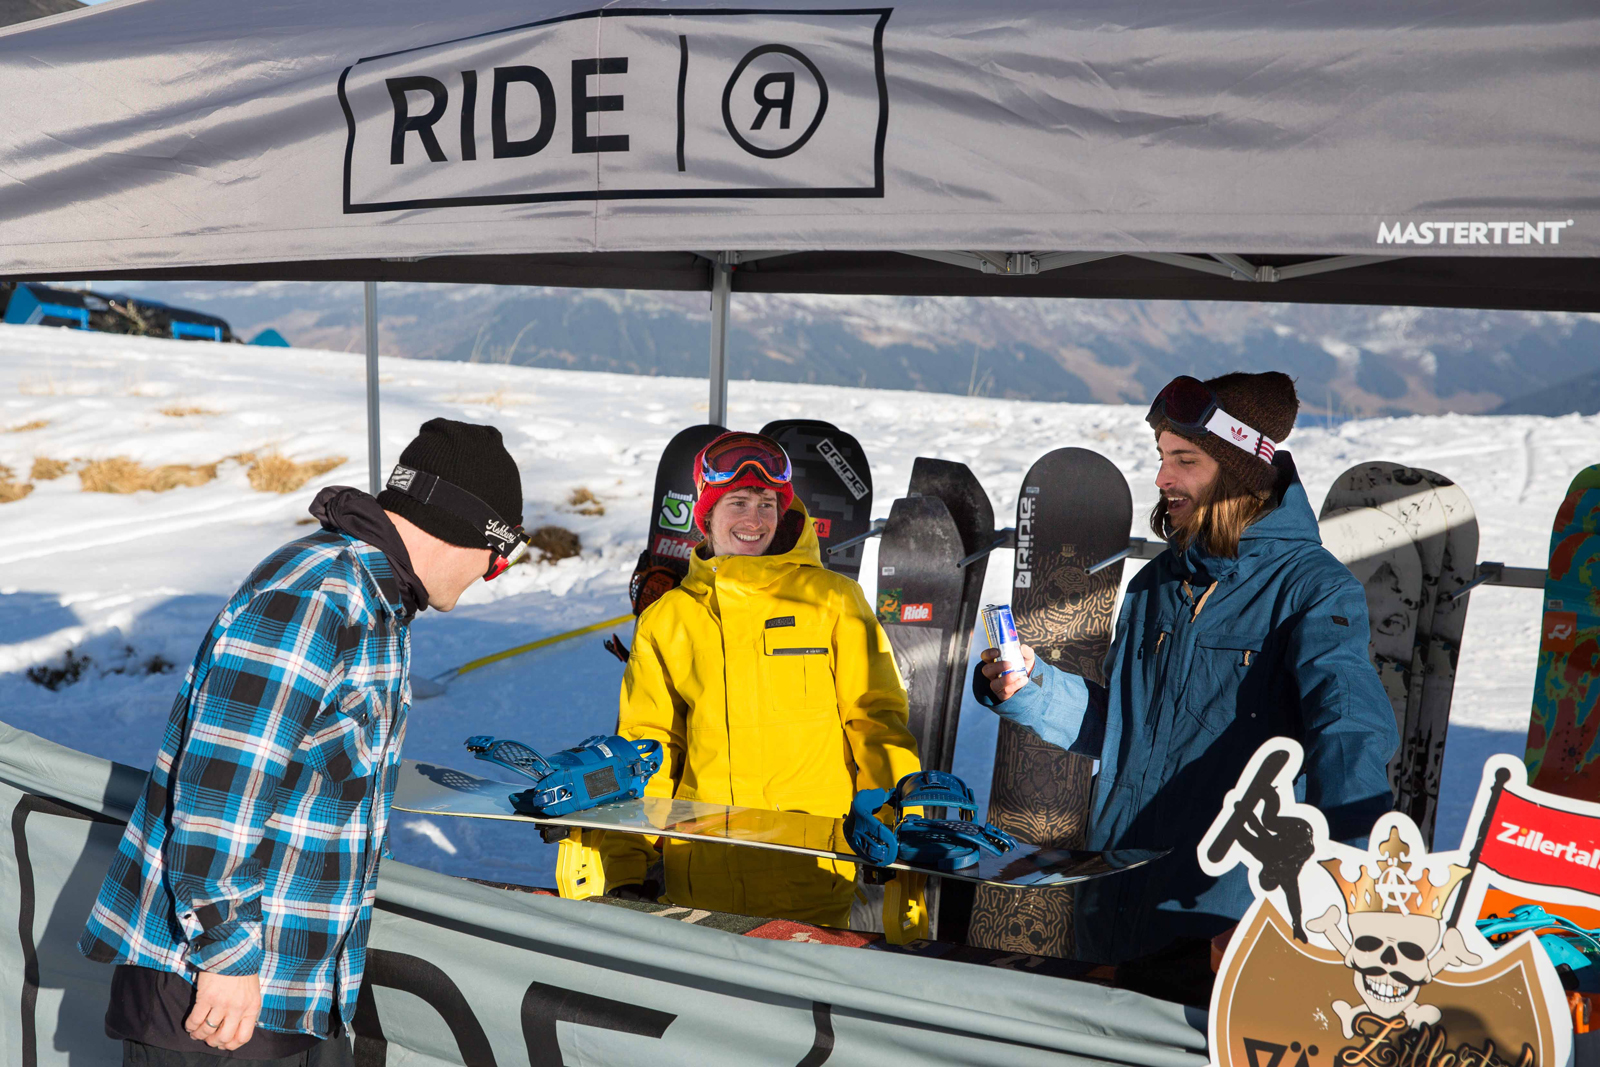 Zillertal VÄLLEY RÄLLEY hosted by Ride Snowboards 2015 / 2016